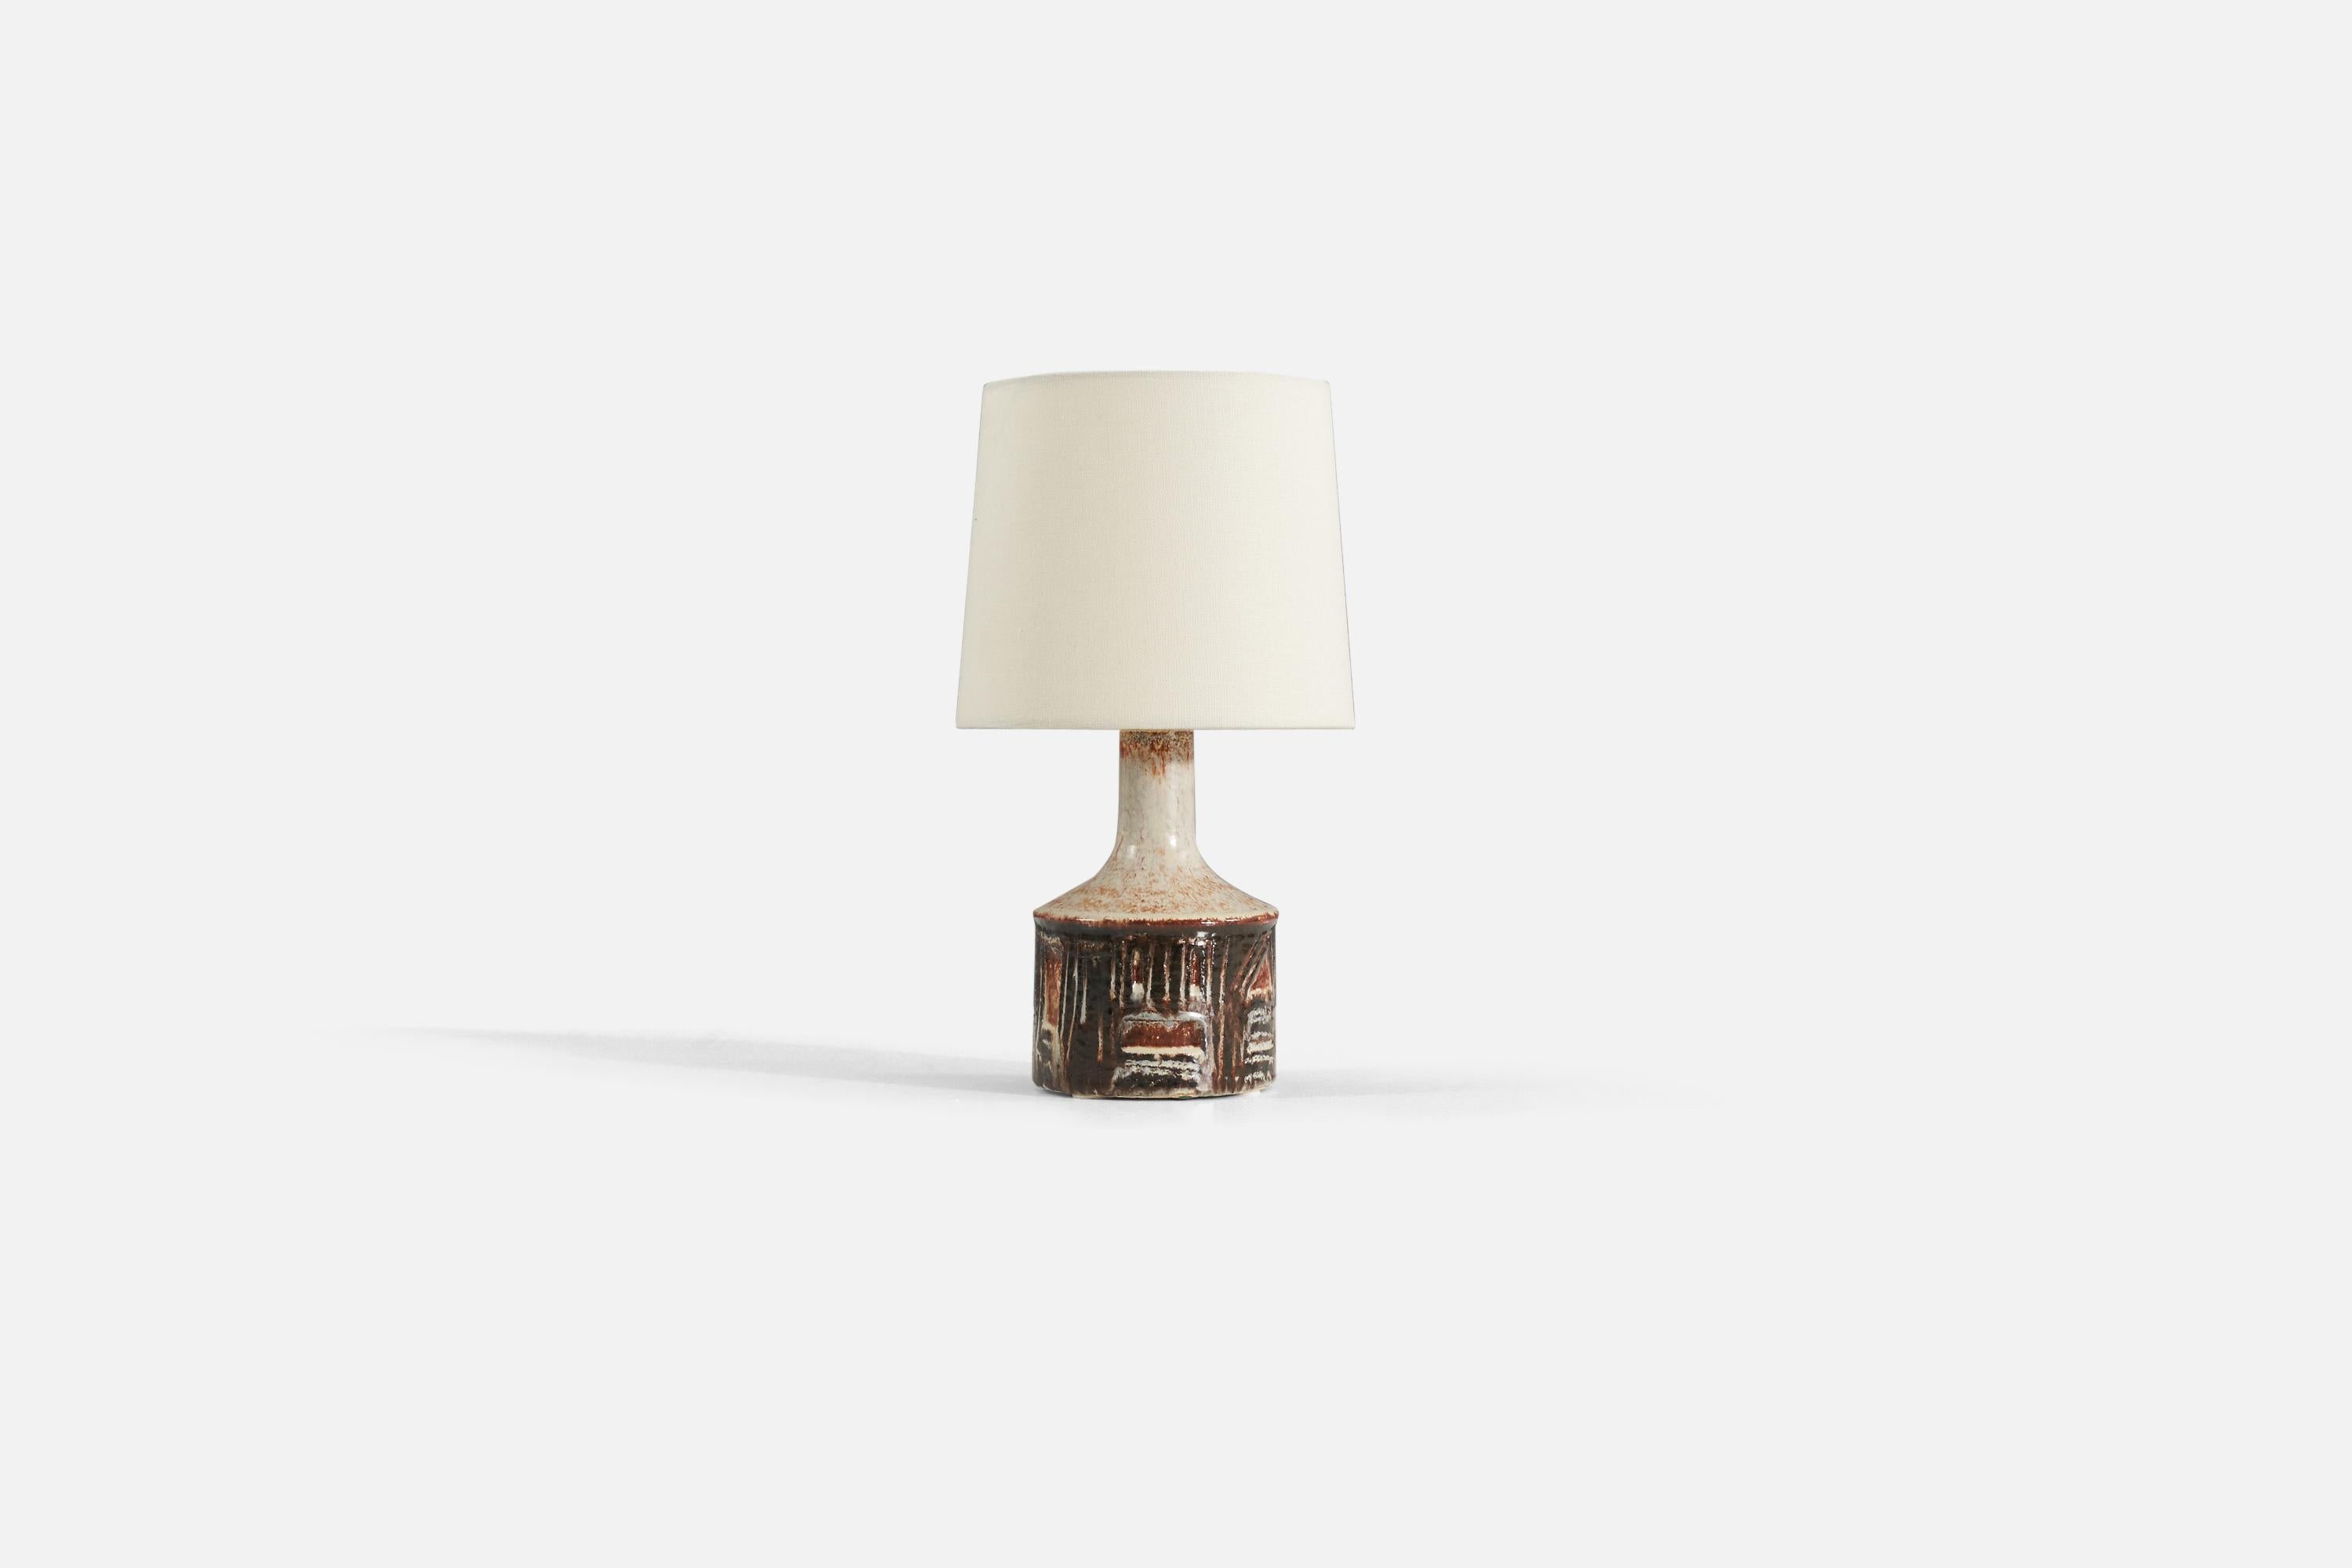 A off-white glazed stoneware table lamp, produced by Jette Hellerøe, Denmark 1960, signed. 

Sold without lampshade. 

Dimensions exclude lampshade, height includes socket.
Measurements listed are of lamp.
Shade : 7 x 8 x 7
Lamp with shade :